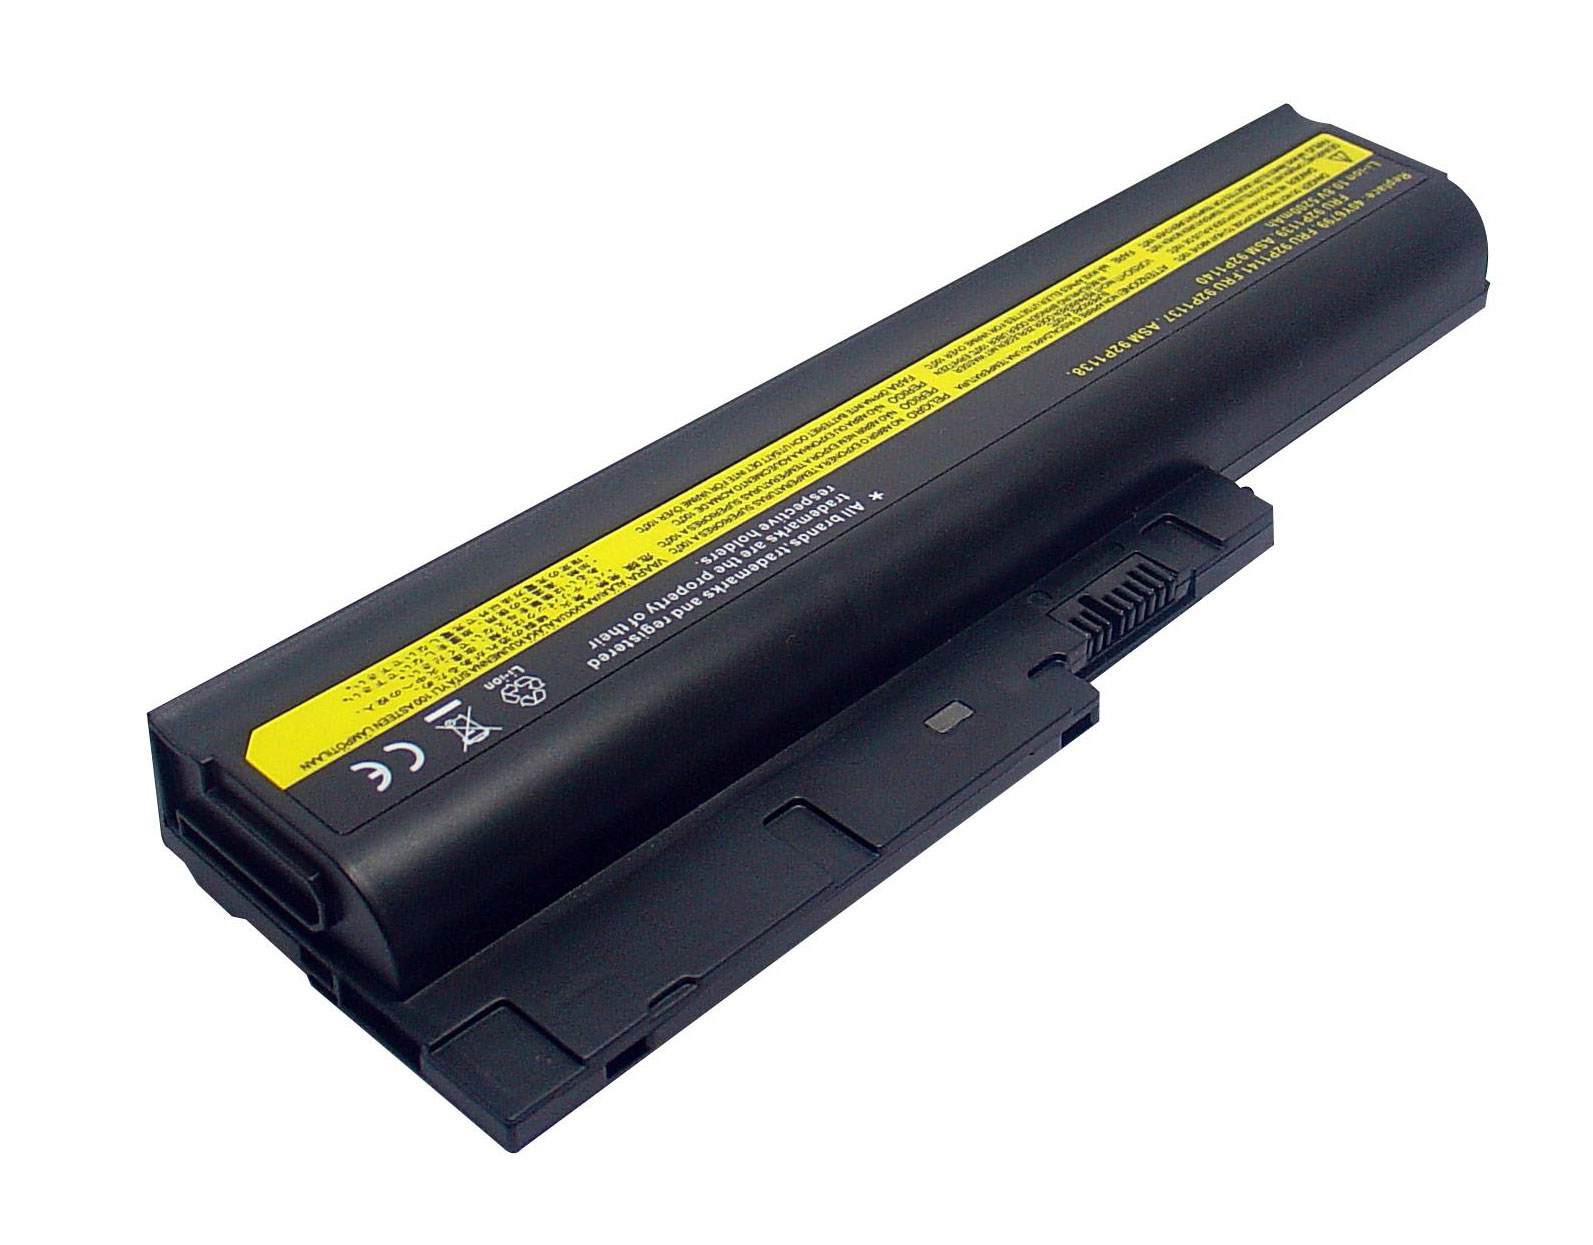 Replacement for LENOVO R500, Thinkpad R500, ThinkPad T500, Thinkpad W500, IdeaPad SL500, LENOVO ThinkPad R61, ThinkPad R61e, ThinkPad R61i, ThinkPad T61, ThinkPad T61p Series Laptop Battery